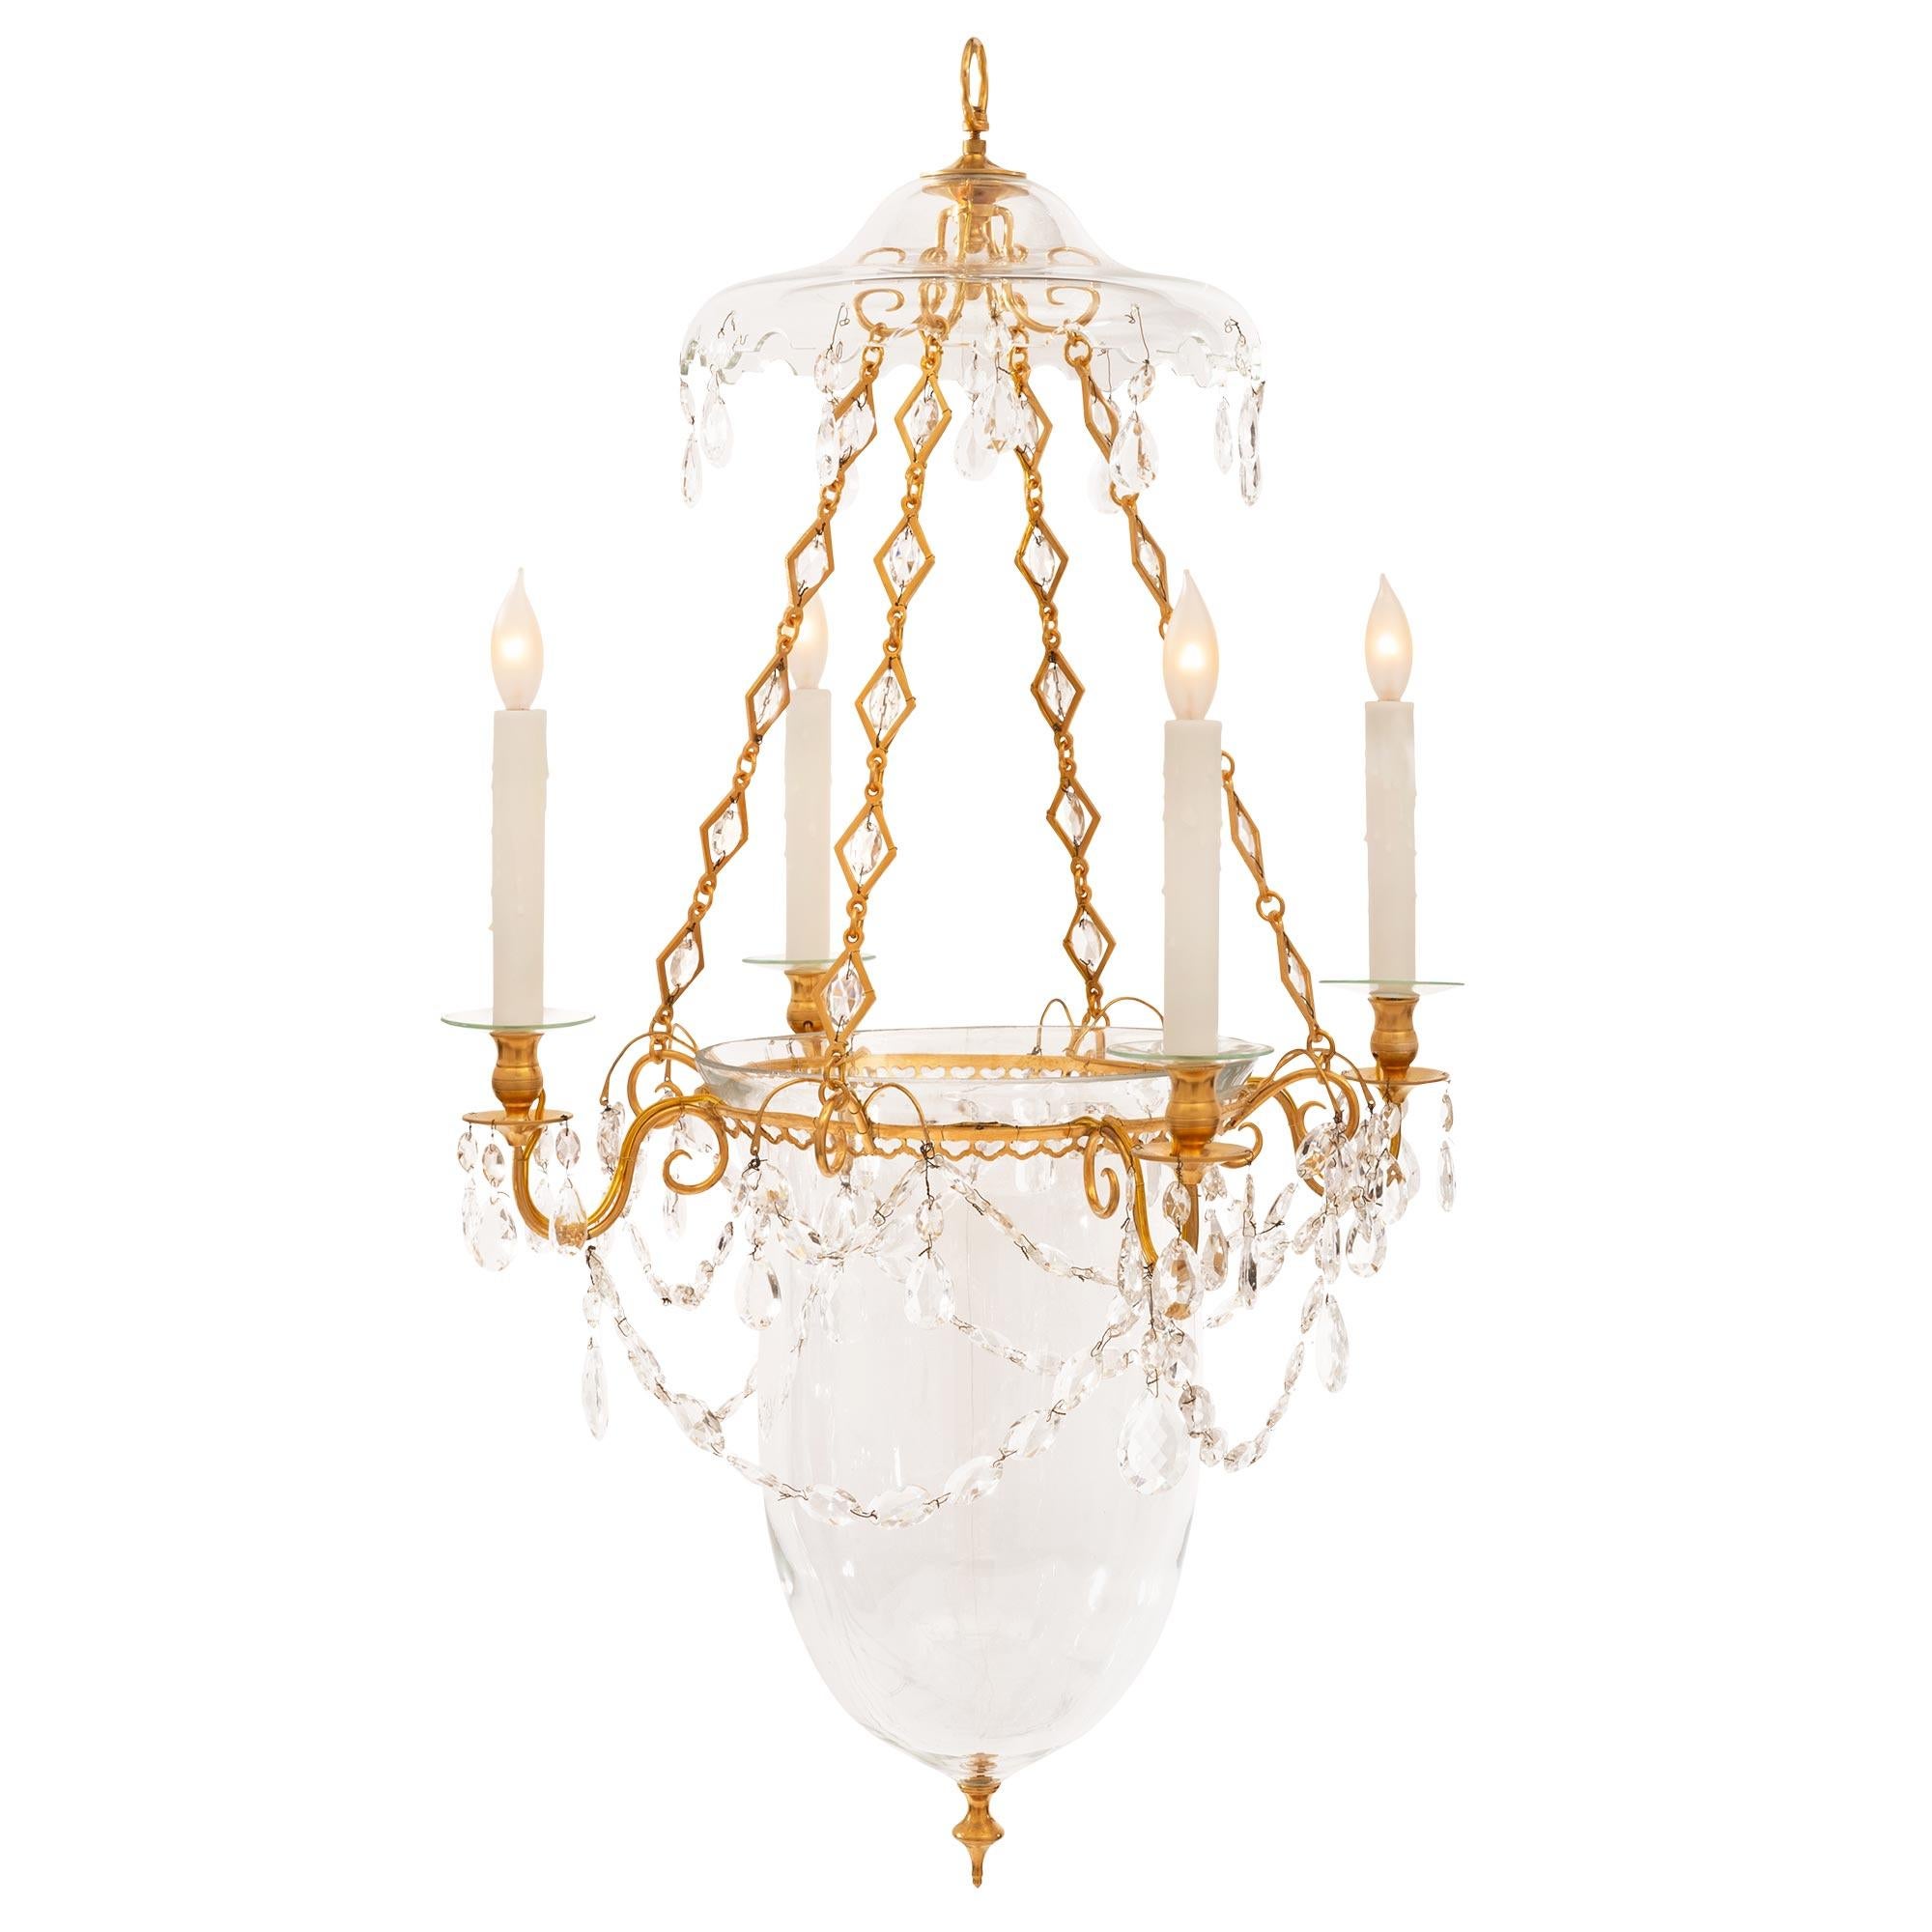 A unique and most elegant Baltic 19th century Louis XVI st. ormolu and hand blown glass lantern. The lantern is centered by a fine bottom ormolu topie shaped finial below the striking and most elegant elongated hand blown bell jar. At the top of the